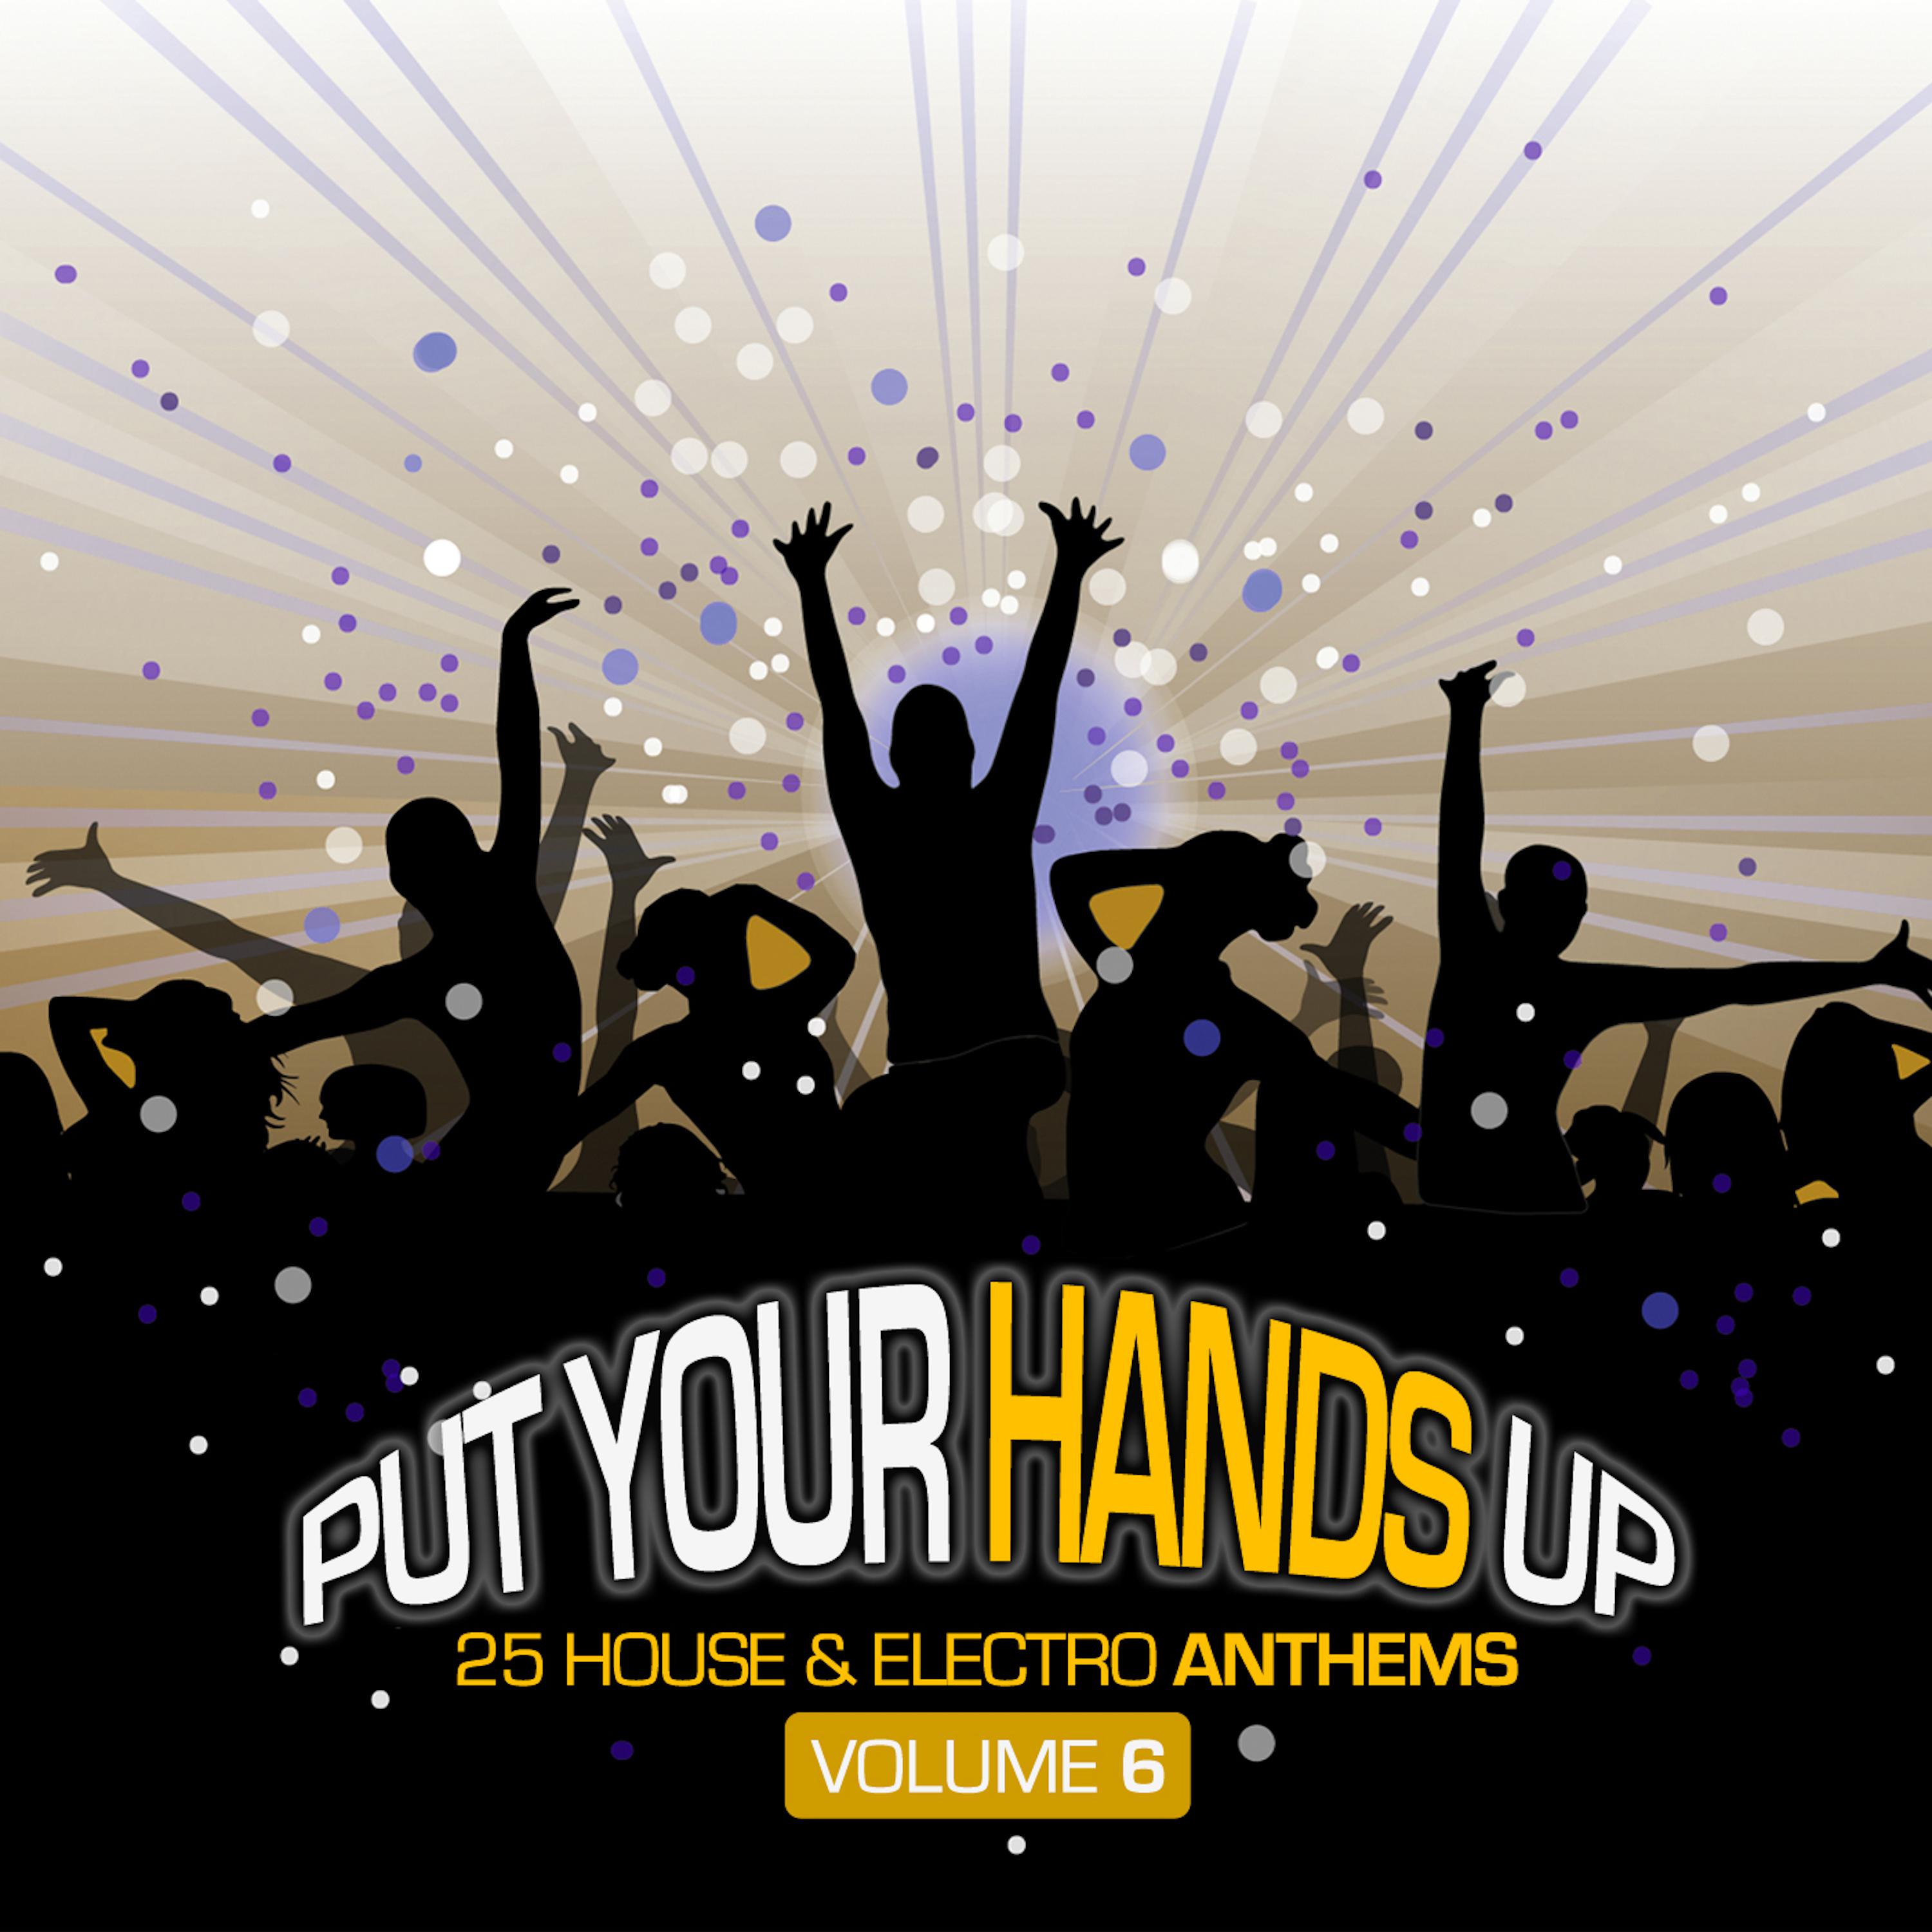 Put Your Hands Up, Vol. 6 - 25 House & Electro Anthems